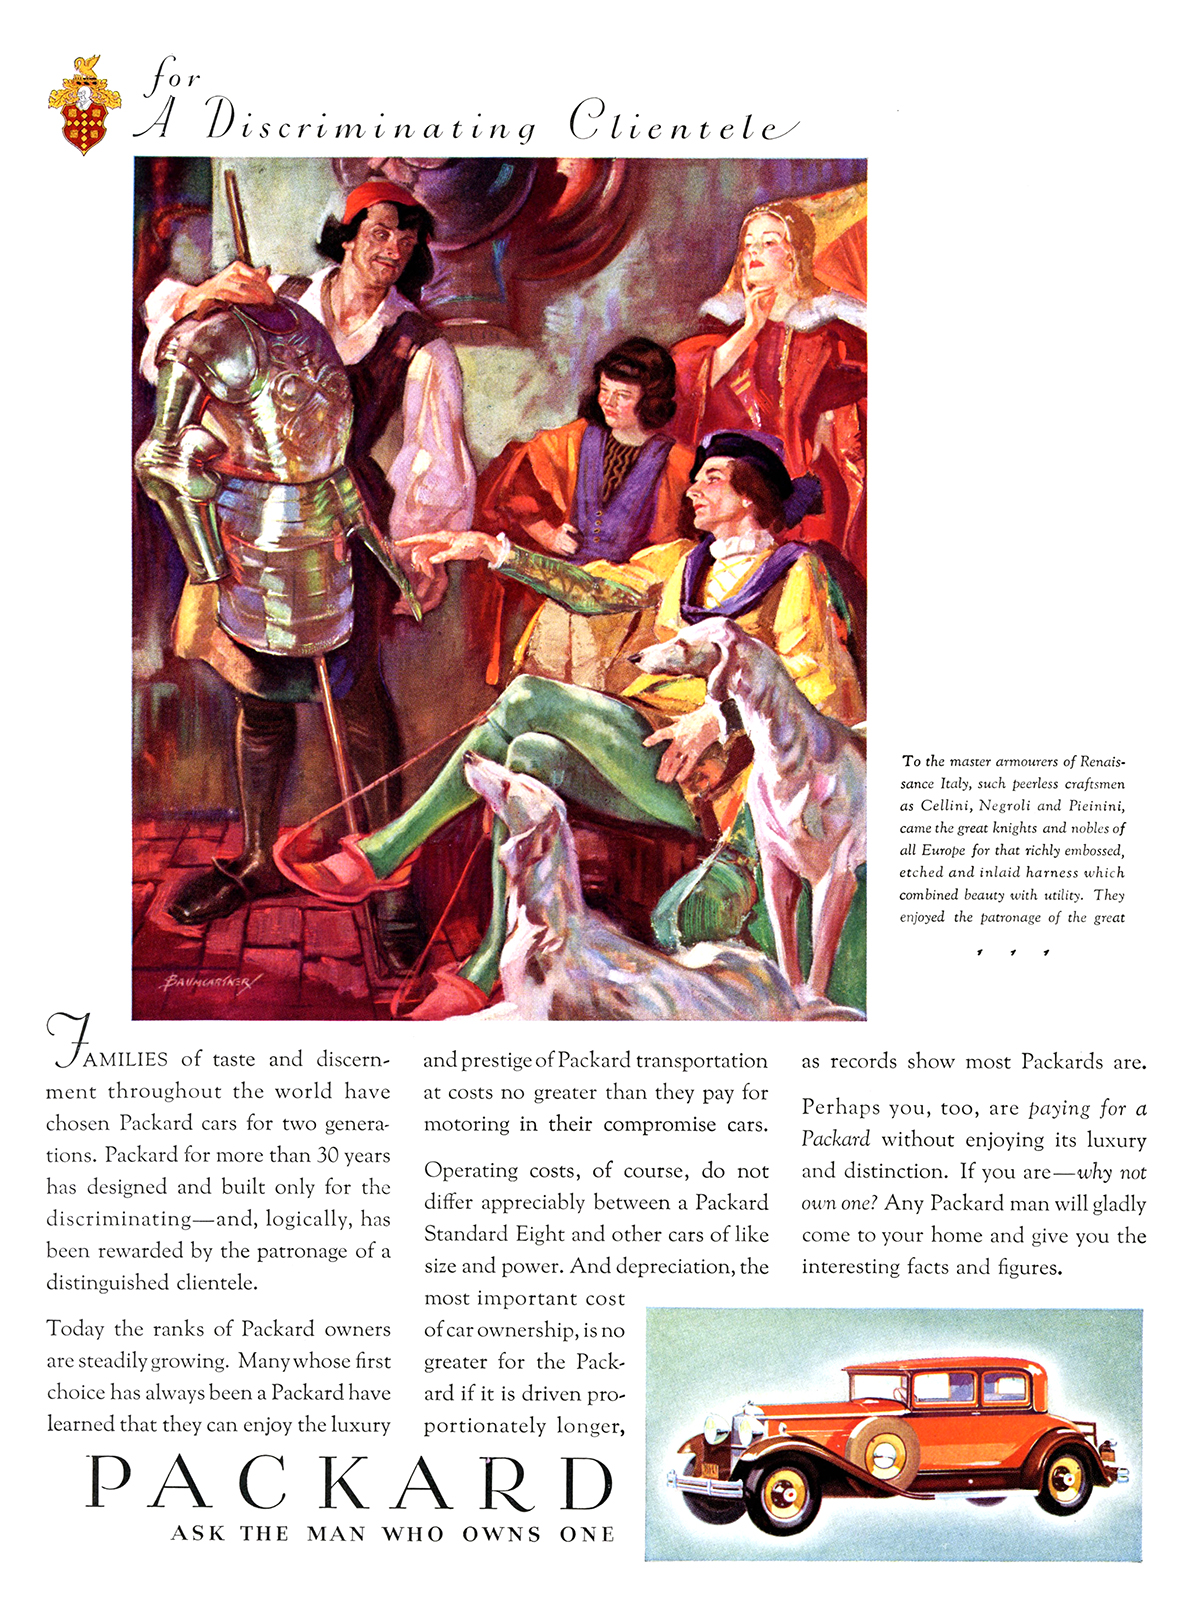 Packard Ad (December, 1930 – January, 1931) – Illustrated by Warren Baumgartner - To the master armourers of Renaissance Italy, such peerless craftsmen as Cellini, Negroli and Pieinini, came the great knights and nobles of all Europe for that richly embossed, etched and inlaid harness which combined beauty with utility. They enjoyed the patronage of the great